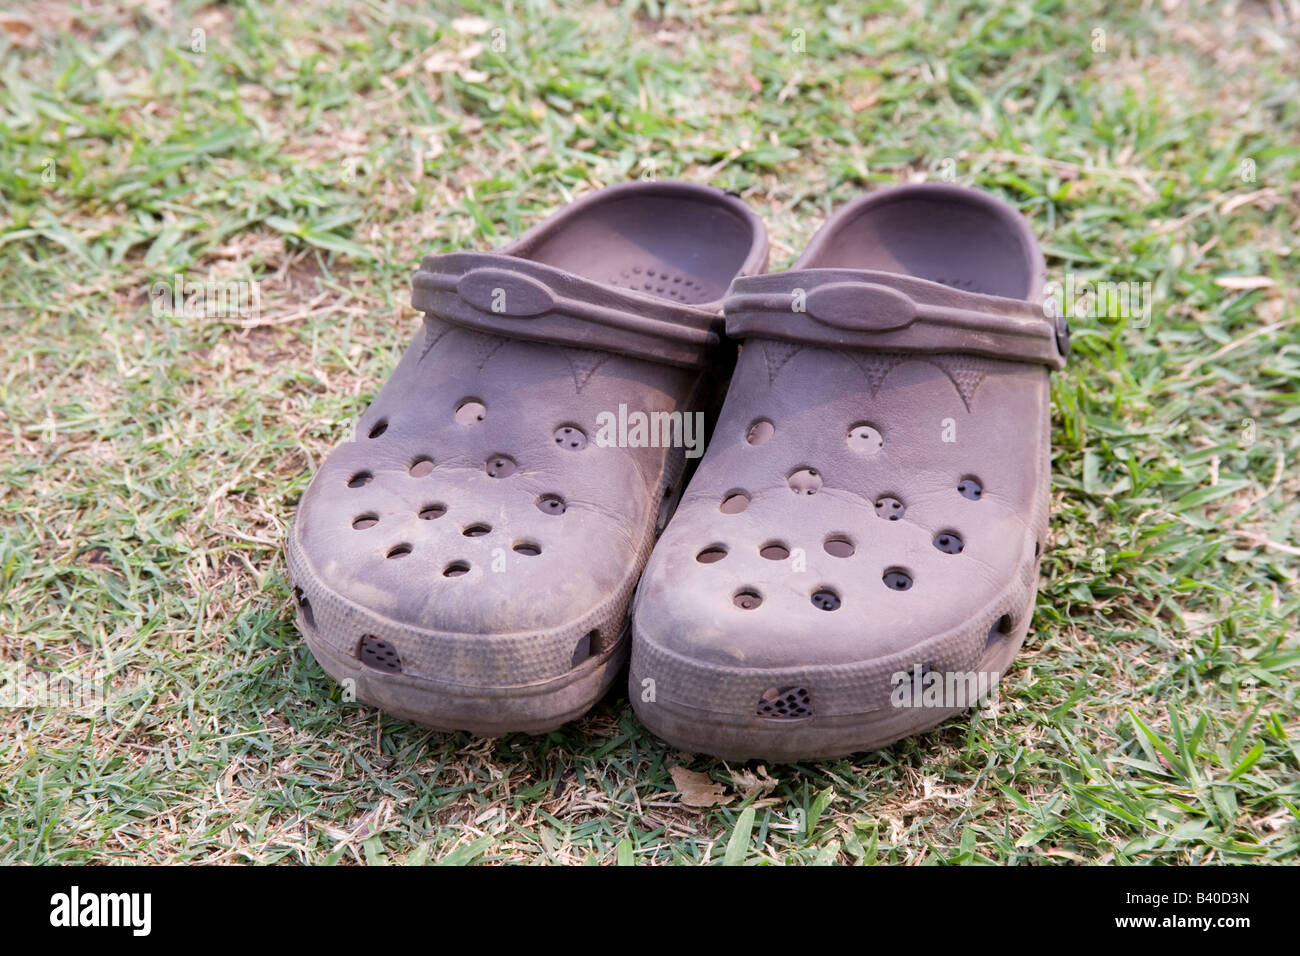 Rubber shoes Zambia Africa Stock Photo